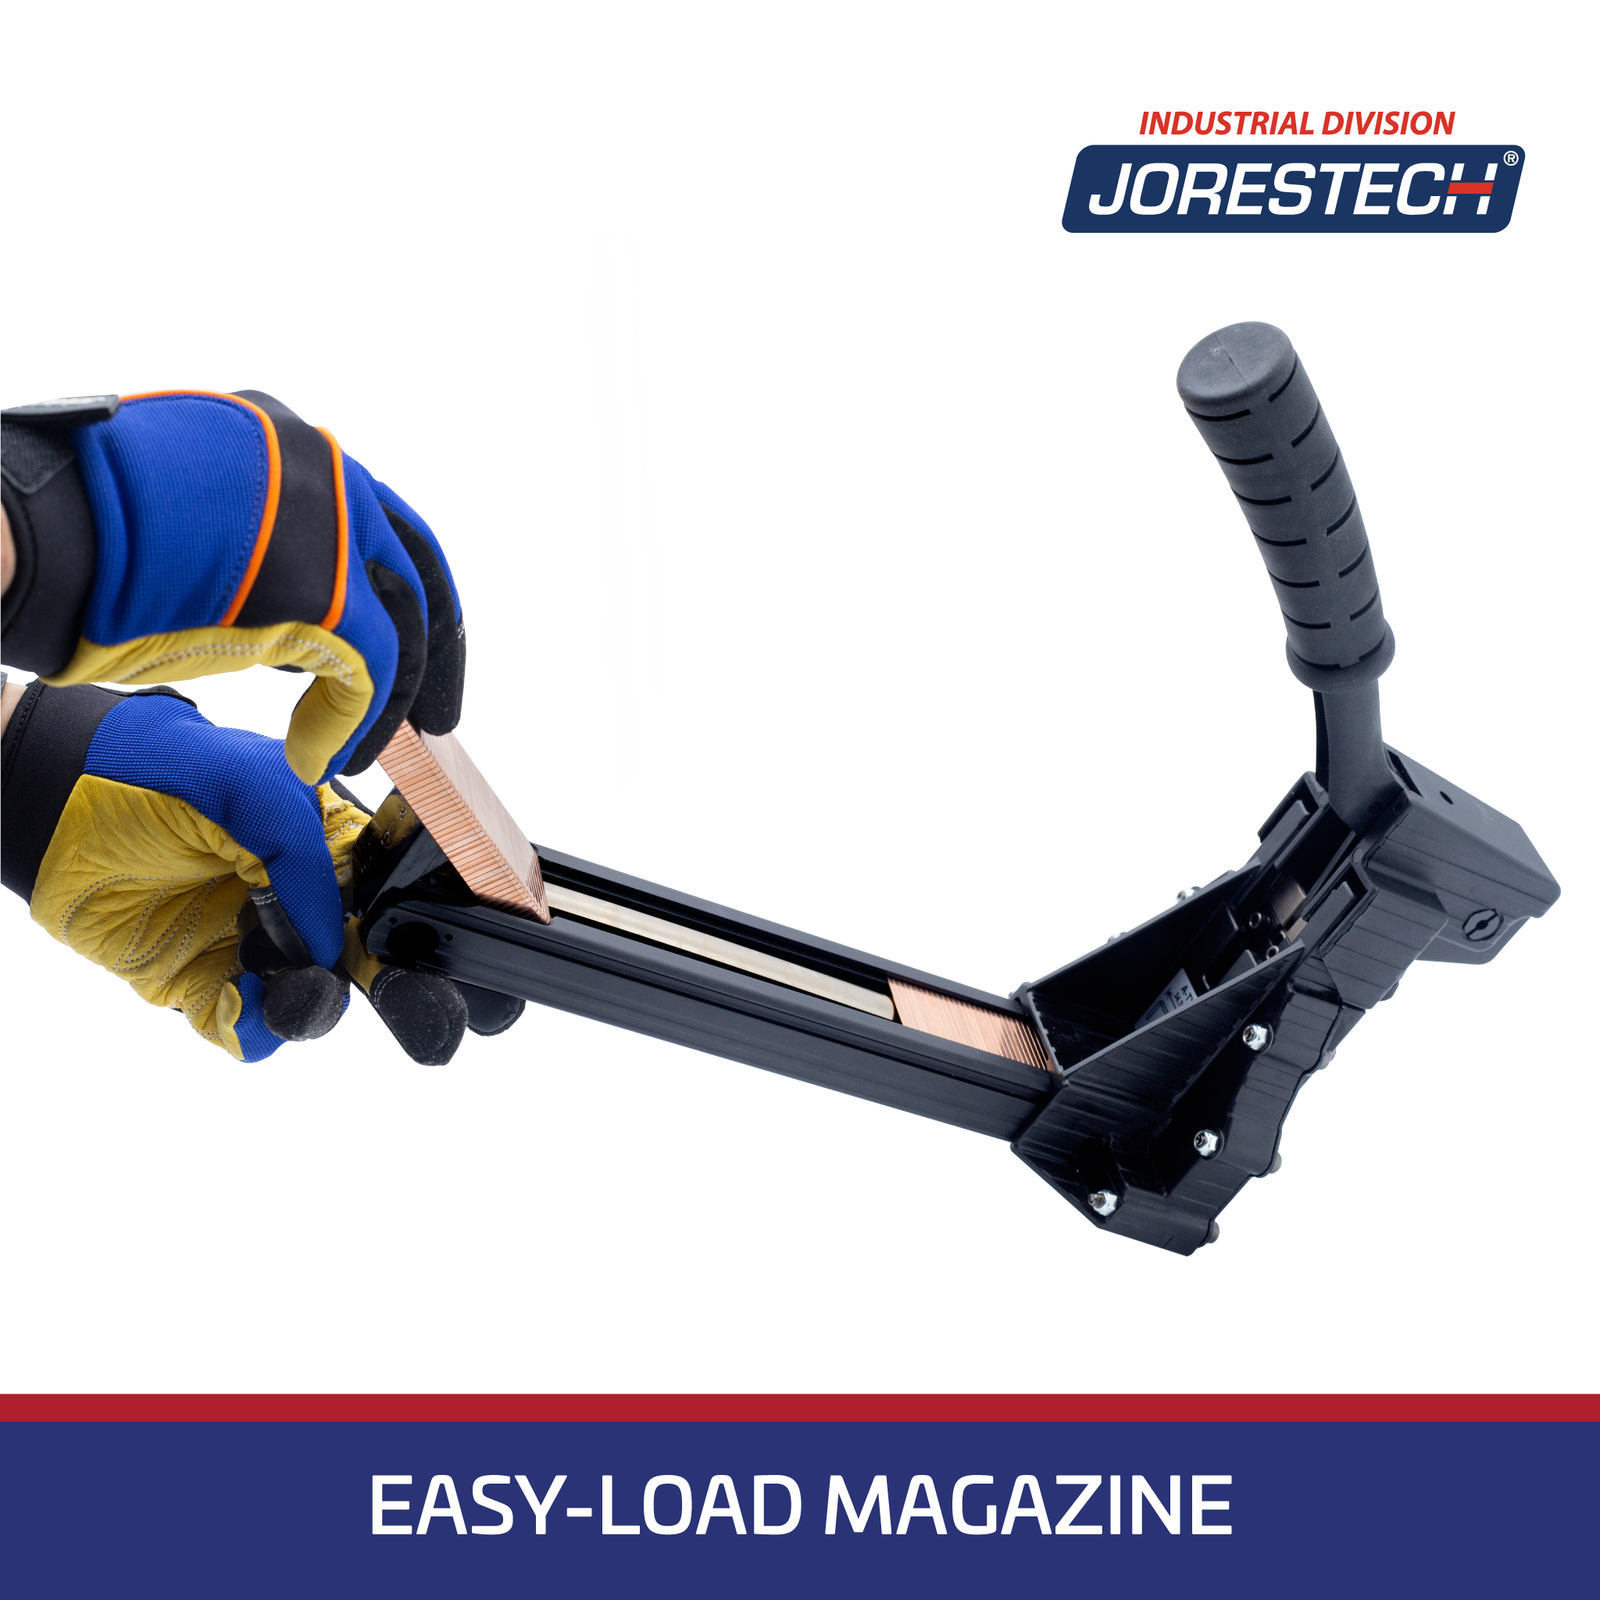 operator wearing blue gloves loading black manual carton stapler with copper colored staples. Blue/red banner reads: easy-load magazine and Jorestech logo